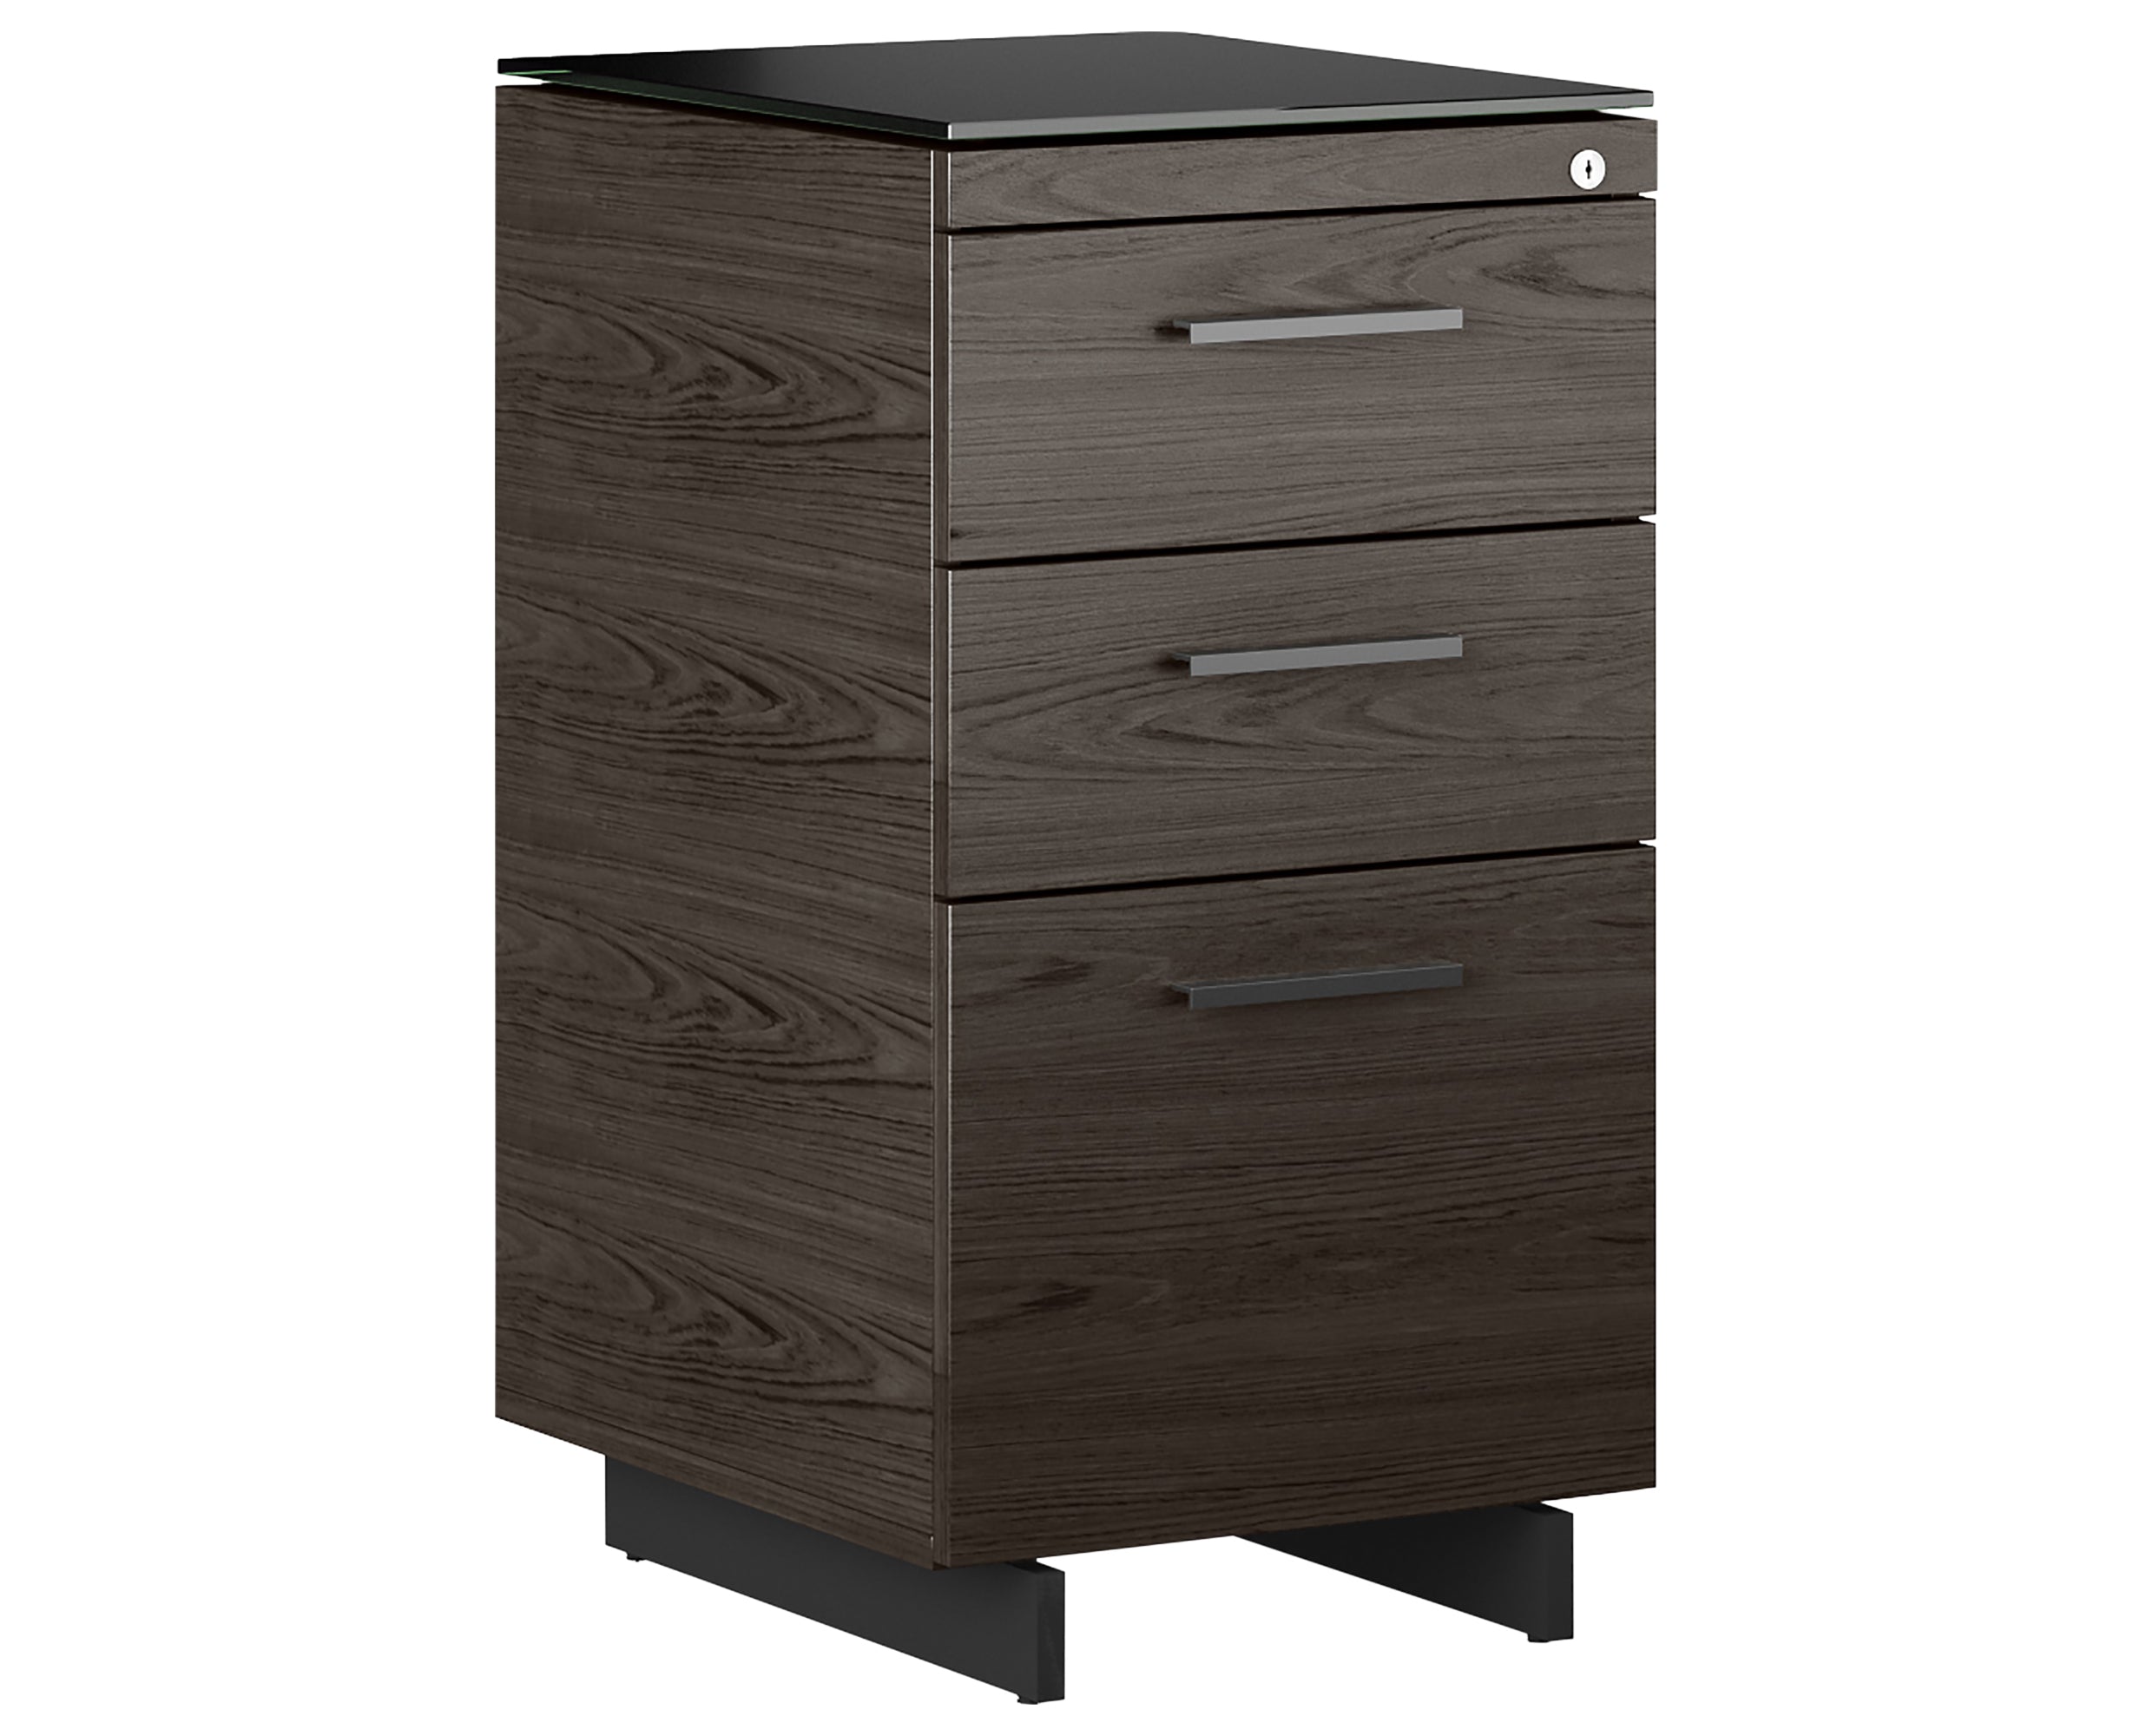 Charcoal Ash Veneer and Black Satin-Etched Glass with Black Steel | BDI Sequel 3 Drawer File Cabinet | Valley Ridge Furniture